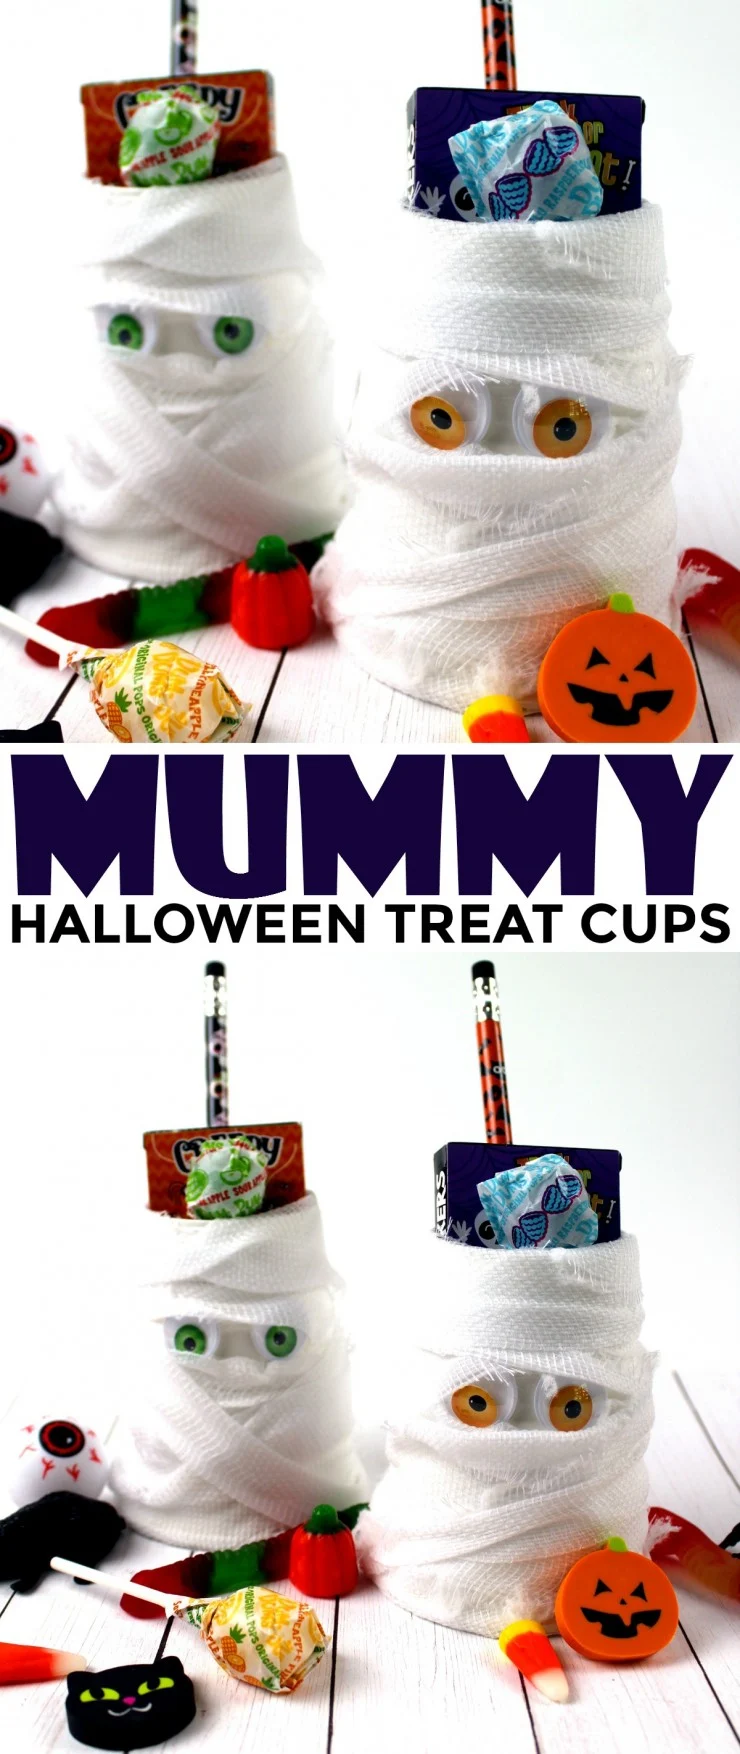 This Mummy Halloween Treat Cups kids craft is a great way to celebrate the holiday - they are a fun little Halloween craft kids will enjoy being creative with. They are great for Halloween party favours!